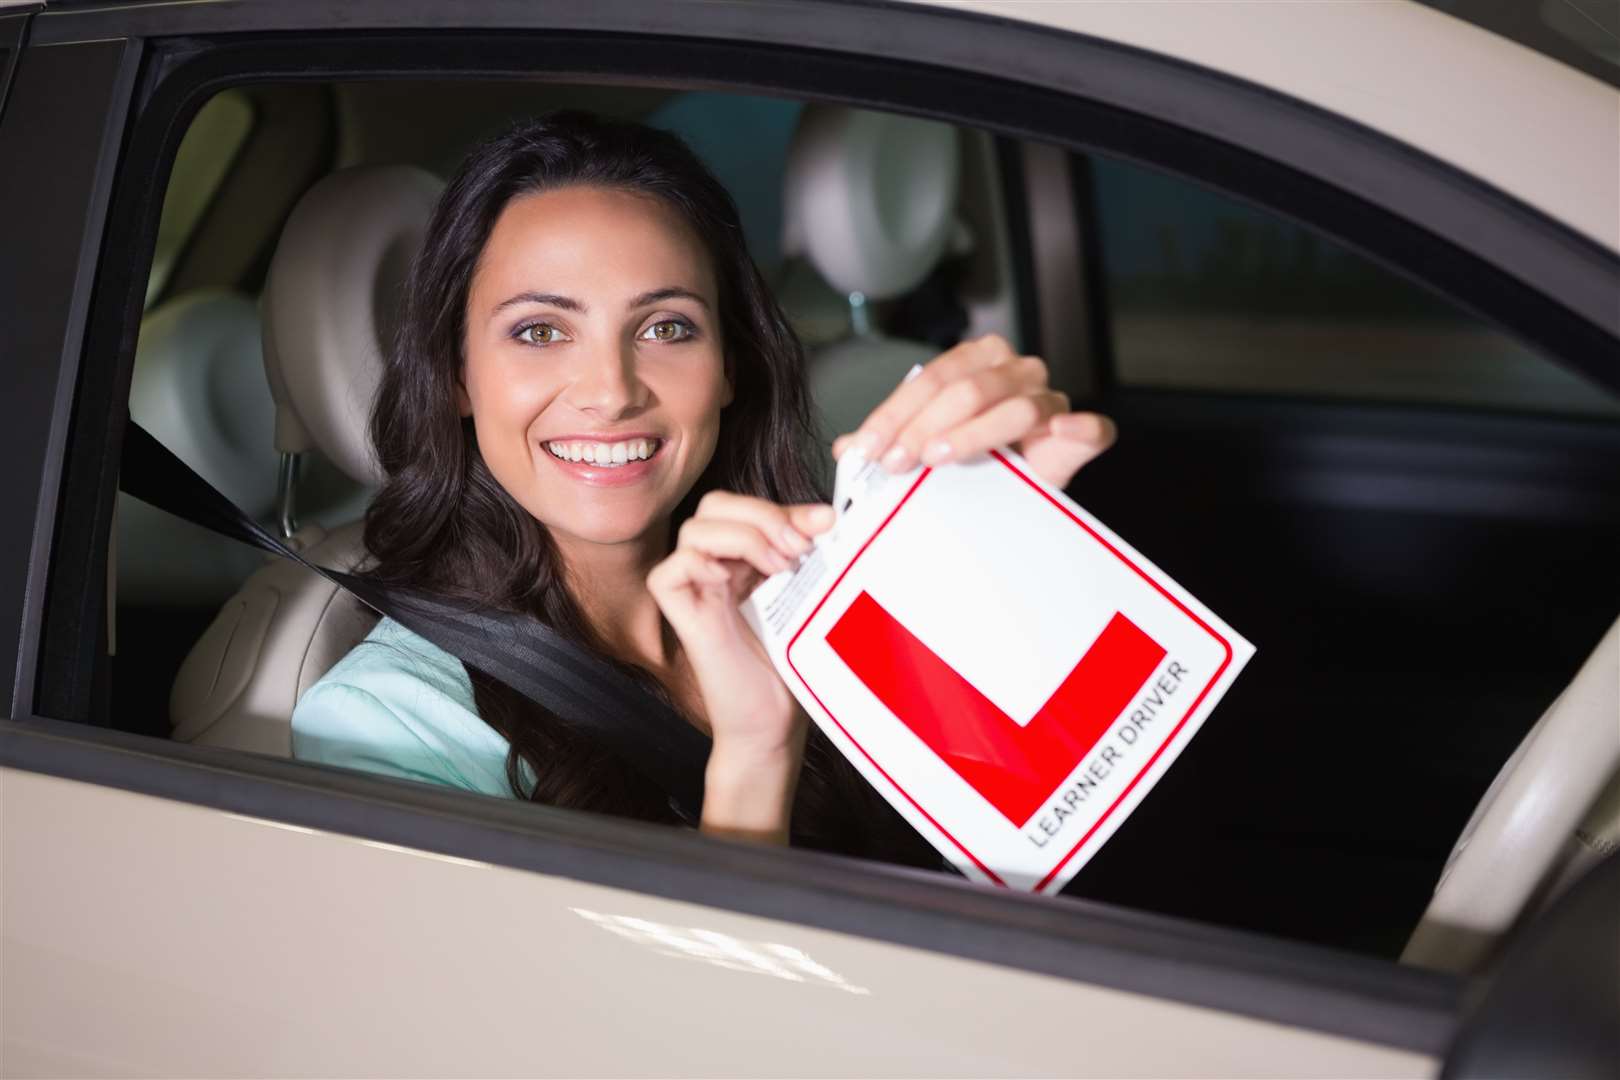 Could younger drivers face restrictions even after passing their test?